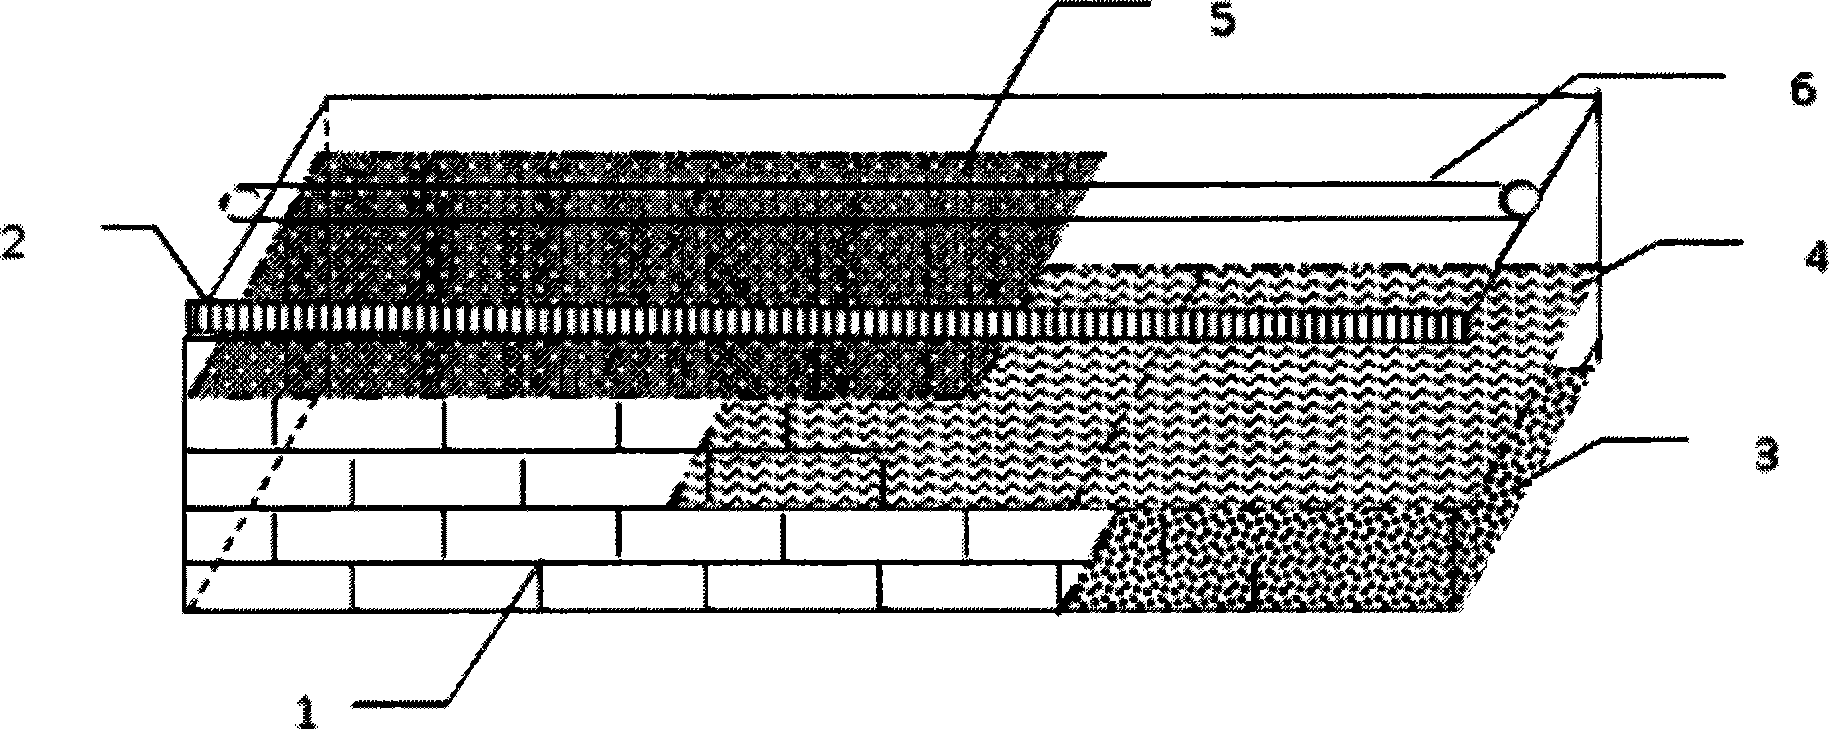 Cut-flower cultivation device and method on protected ground